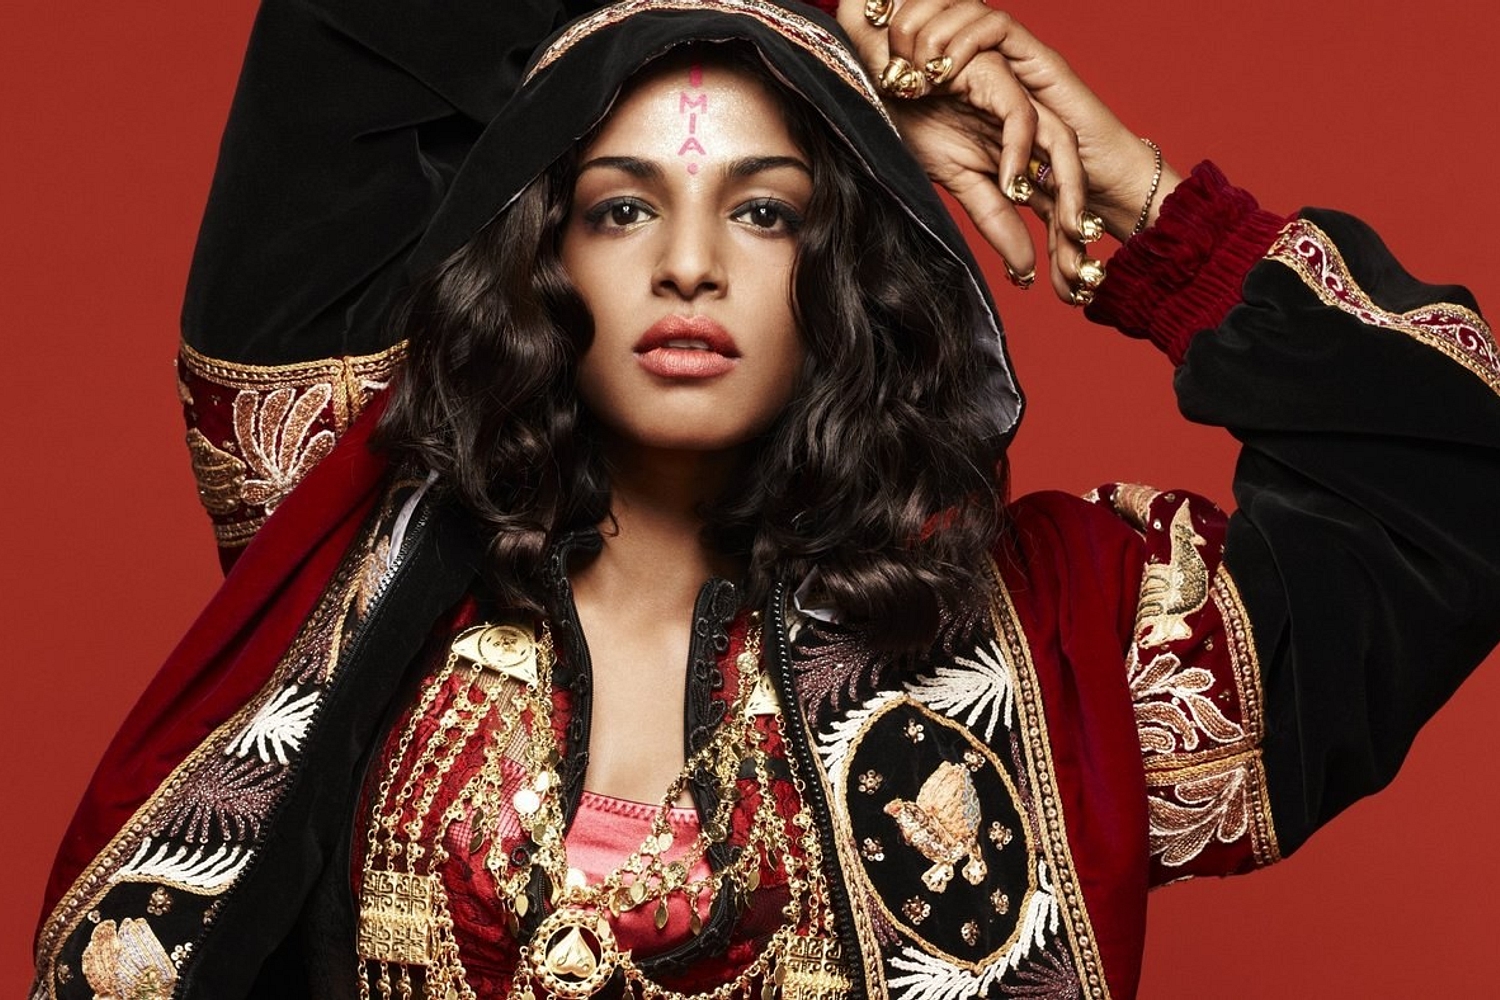 M.I.A. has got ‘GOALS’ on her new track